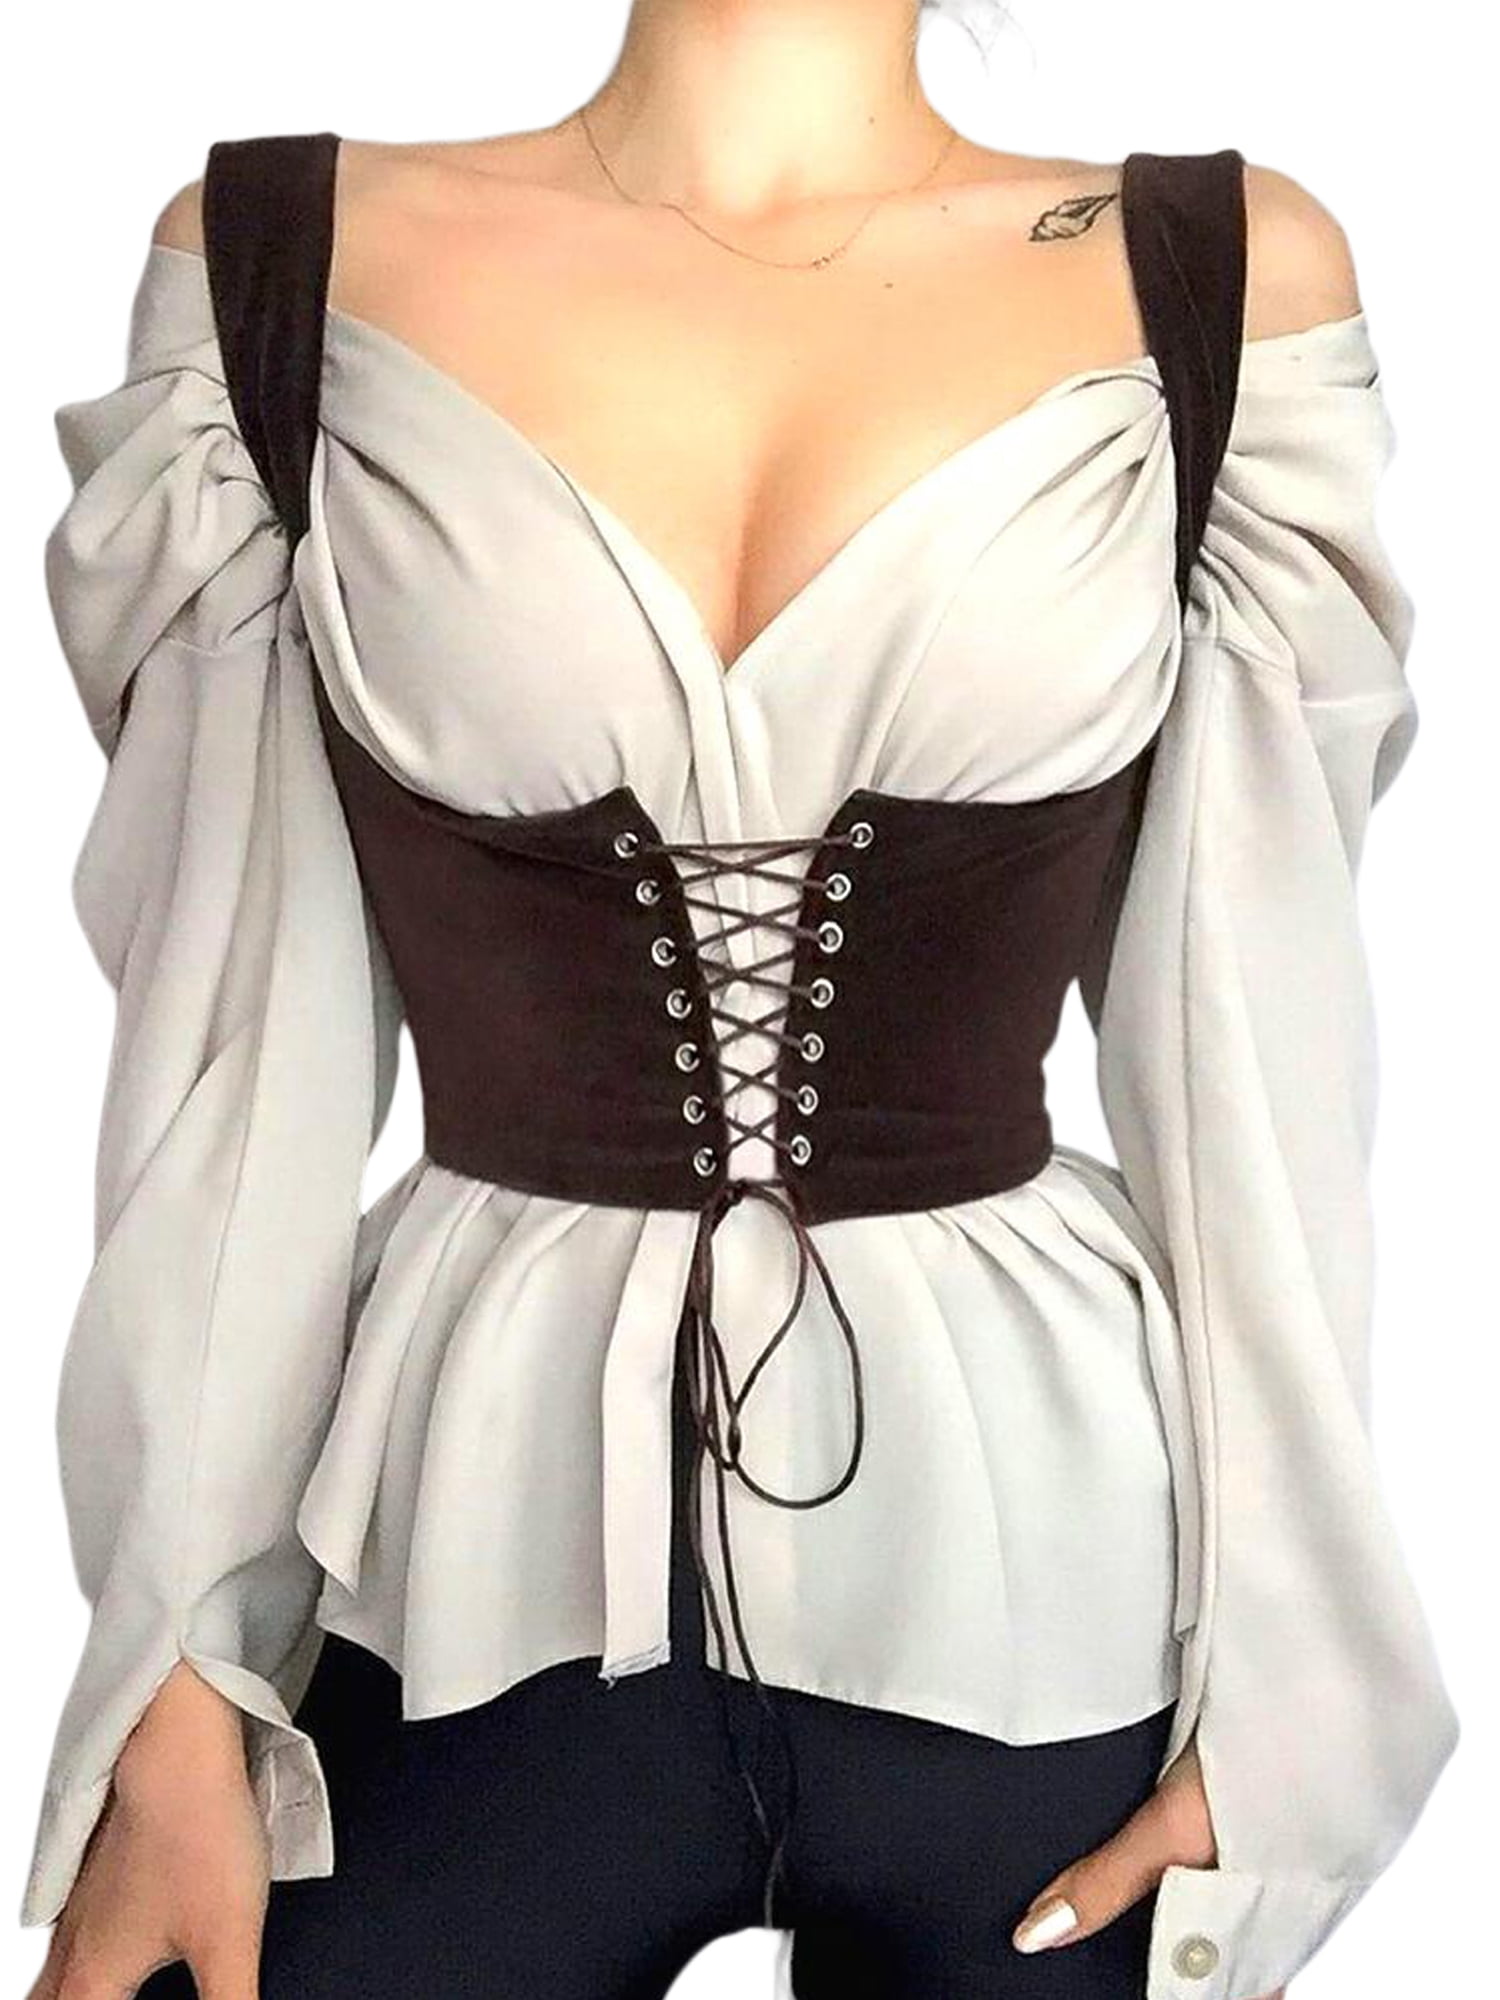 Black Mesh Corset Tops For Women Lace Up Busiter Lingerie Satin Overbust  Shapewear Outfit For Christmas Costume Halloween Party